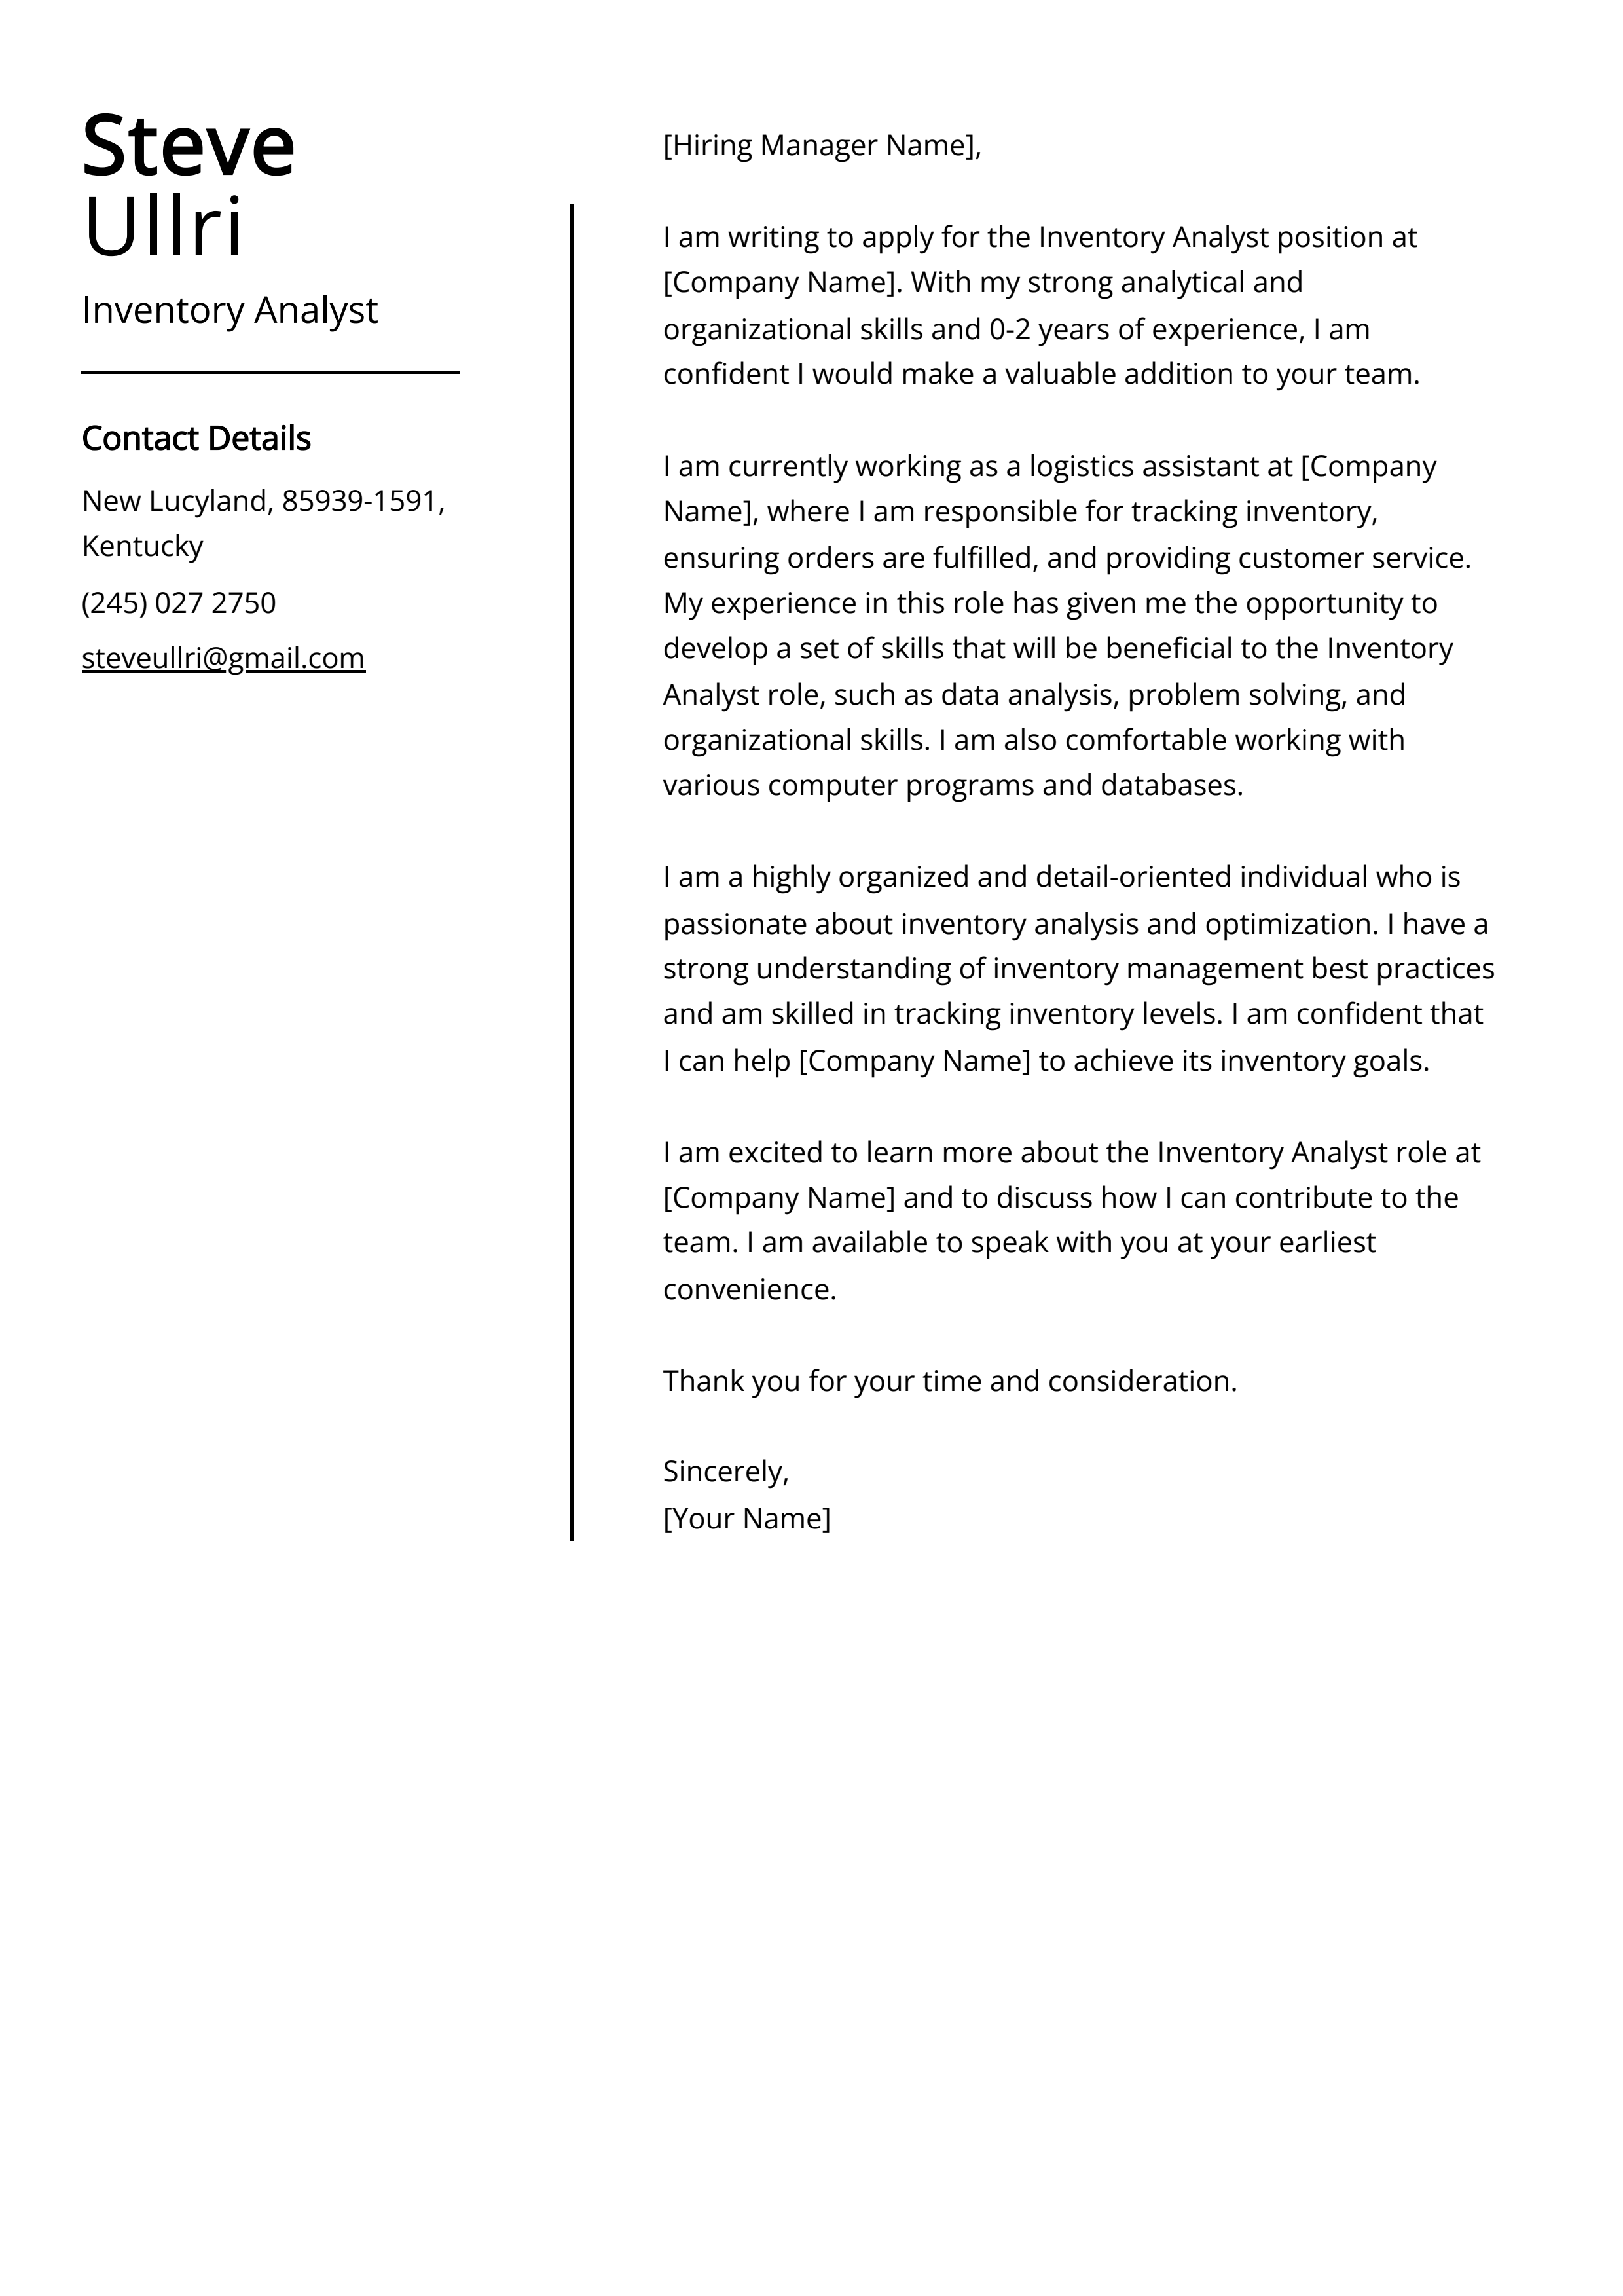 Inventory Analyst Cover Letter Example